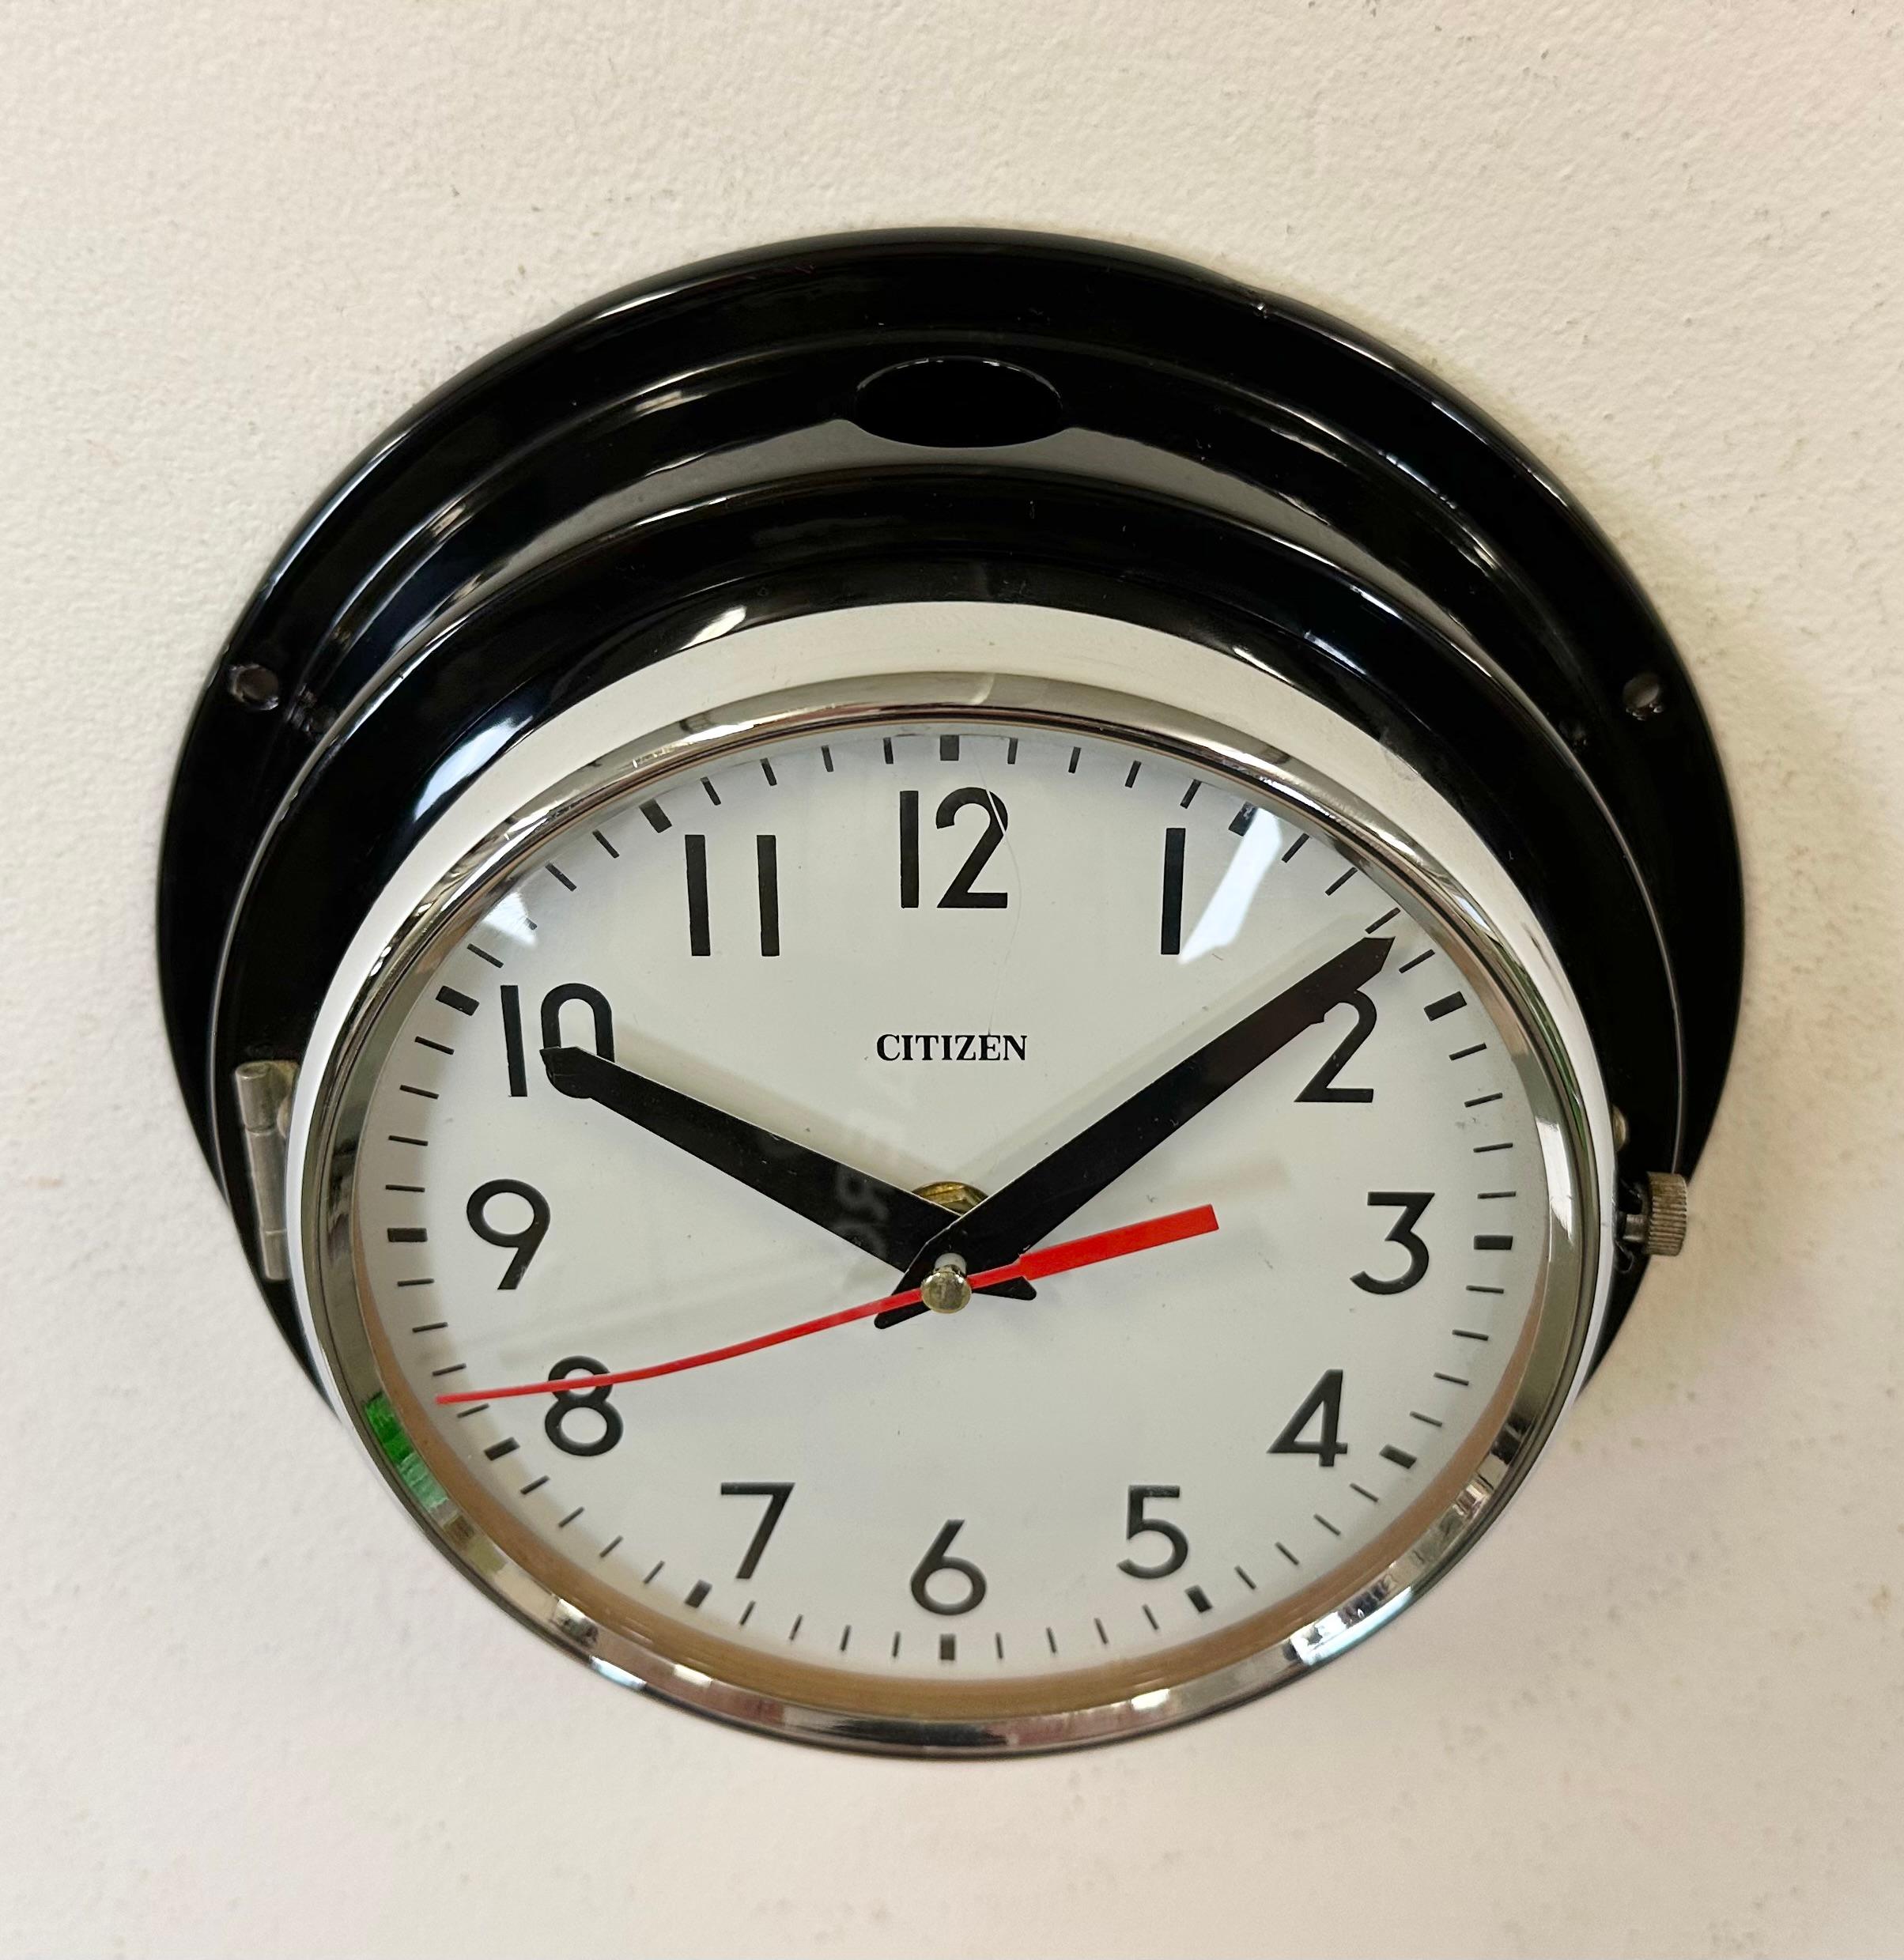 Vintage Black Citizen Maritime Wall Clock, 1970s In Good Condition For Sale In Kojetice, CZ